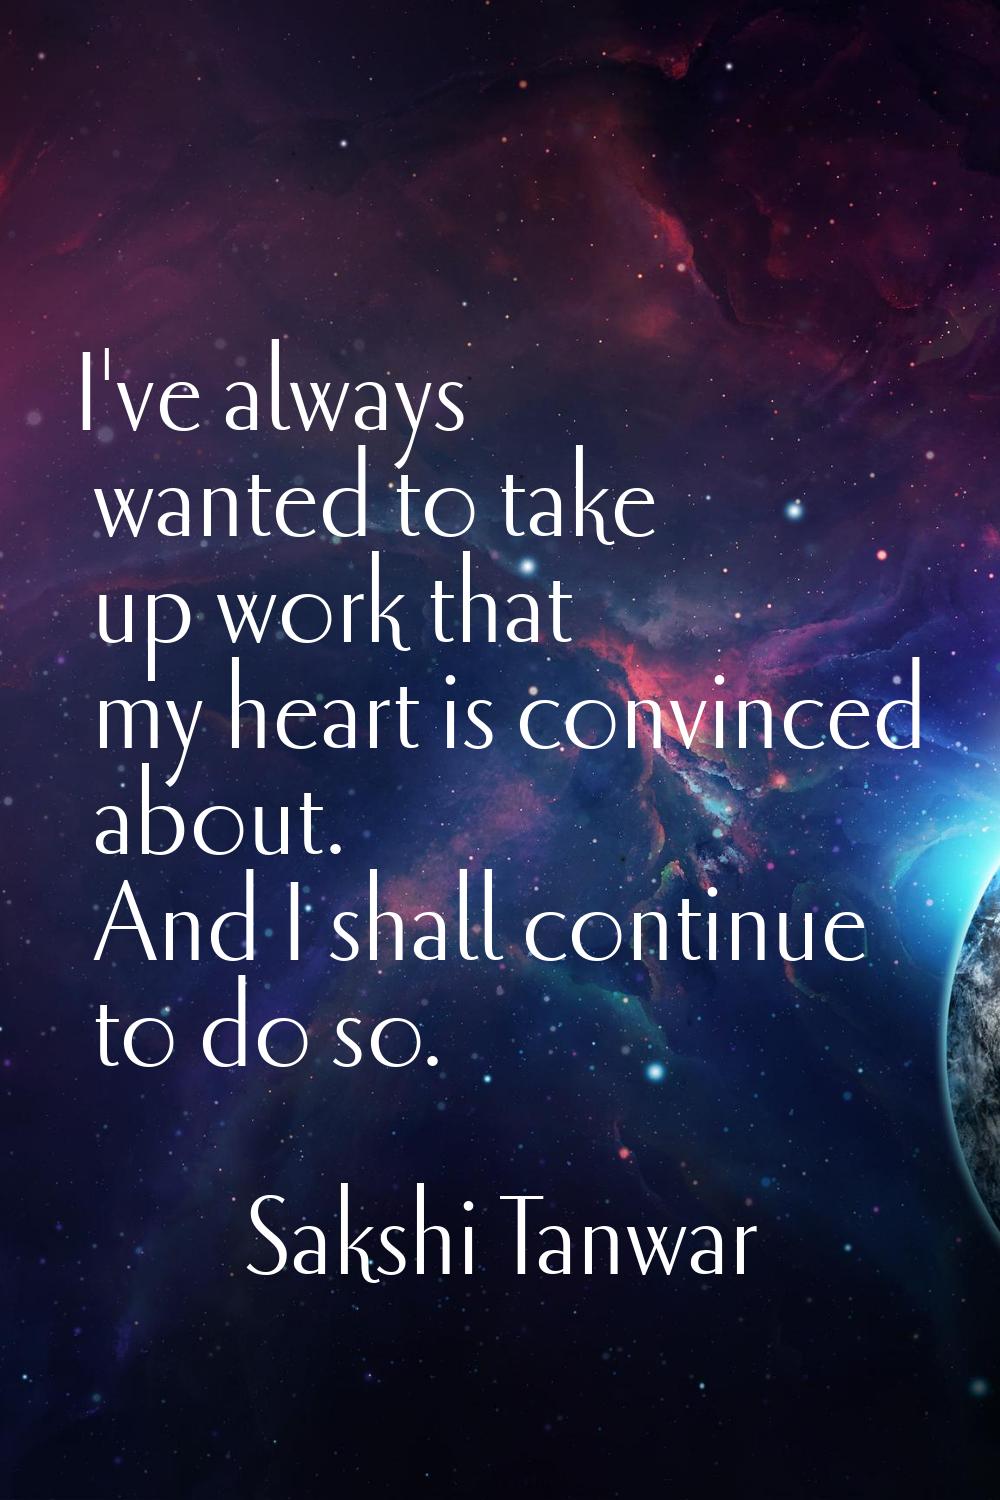 I've always wanted to take up work that my heart is convinced about. And I shall continue to do so.